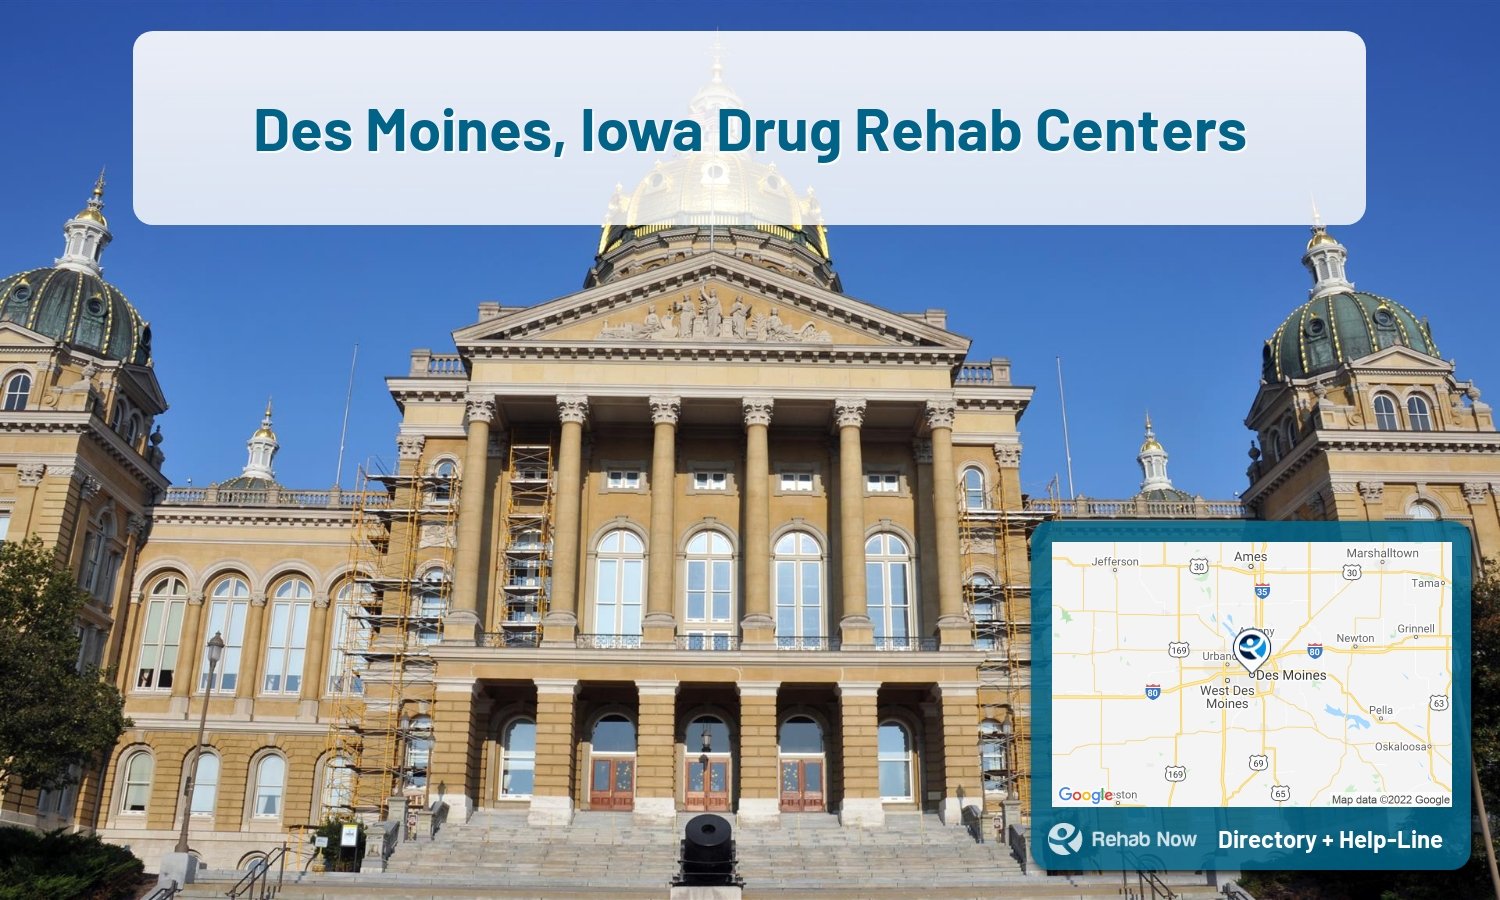 View options, availability, treatment methods, and more, for drug rehab and alcohol treatment in Des Moines, Iowa